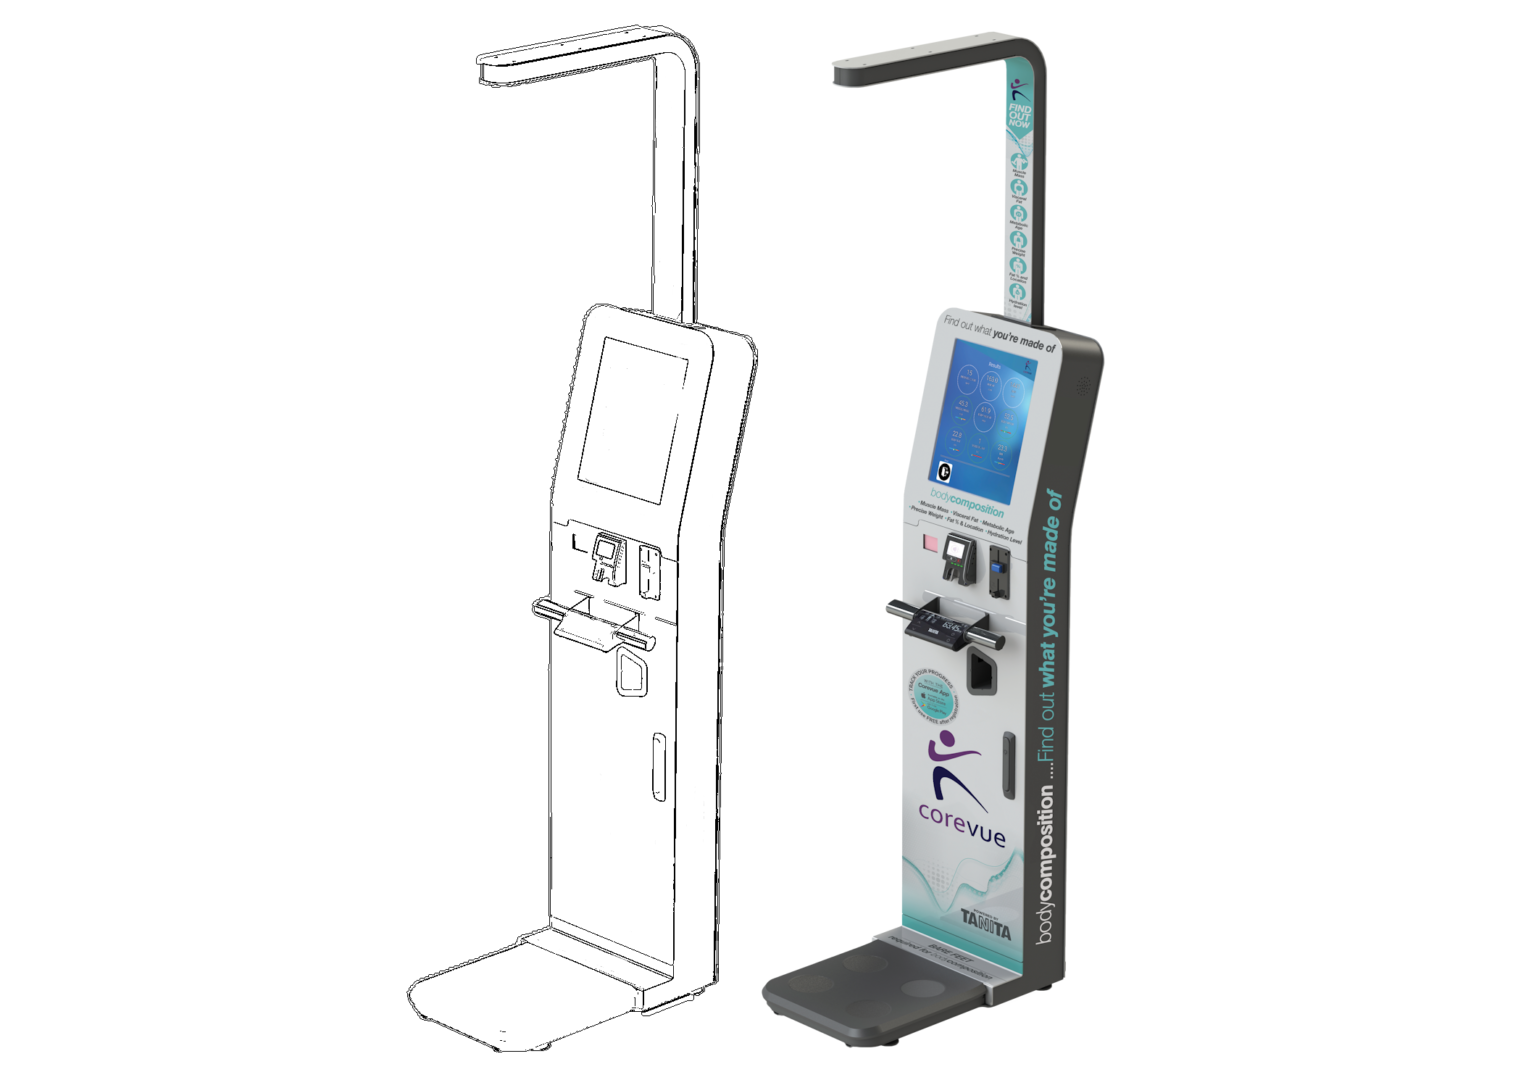 a digital kiosk being manufactured in the UK for measuring full body composition using a Tanita scale